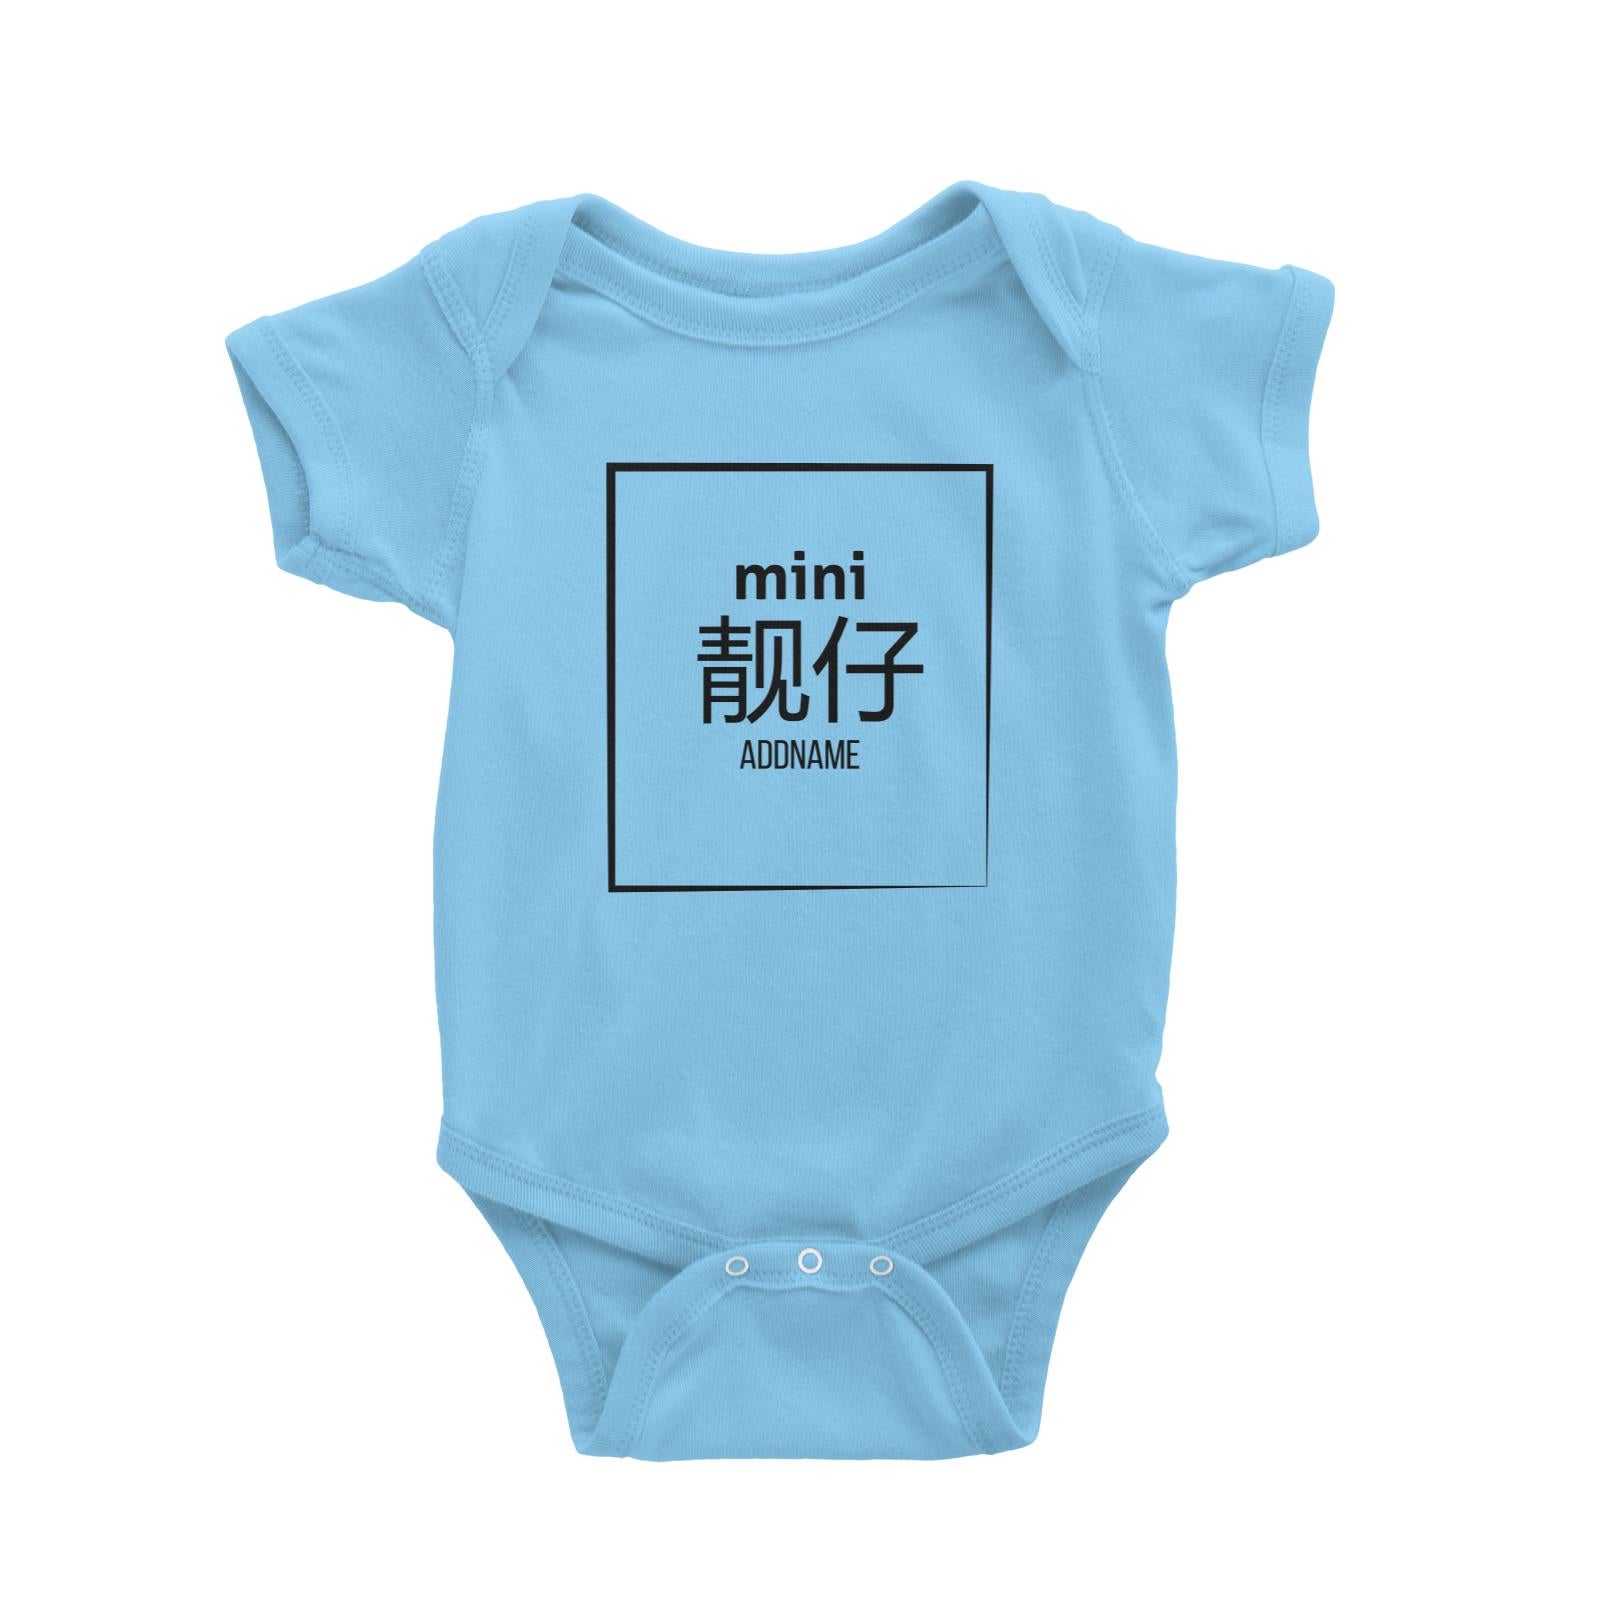 Mini Leng Zai in Chinese Words Baby Romper